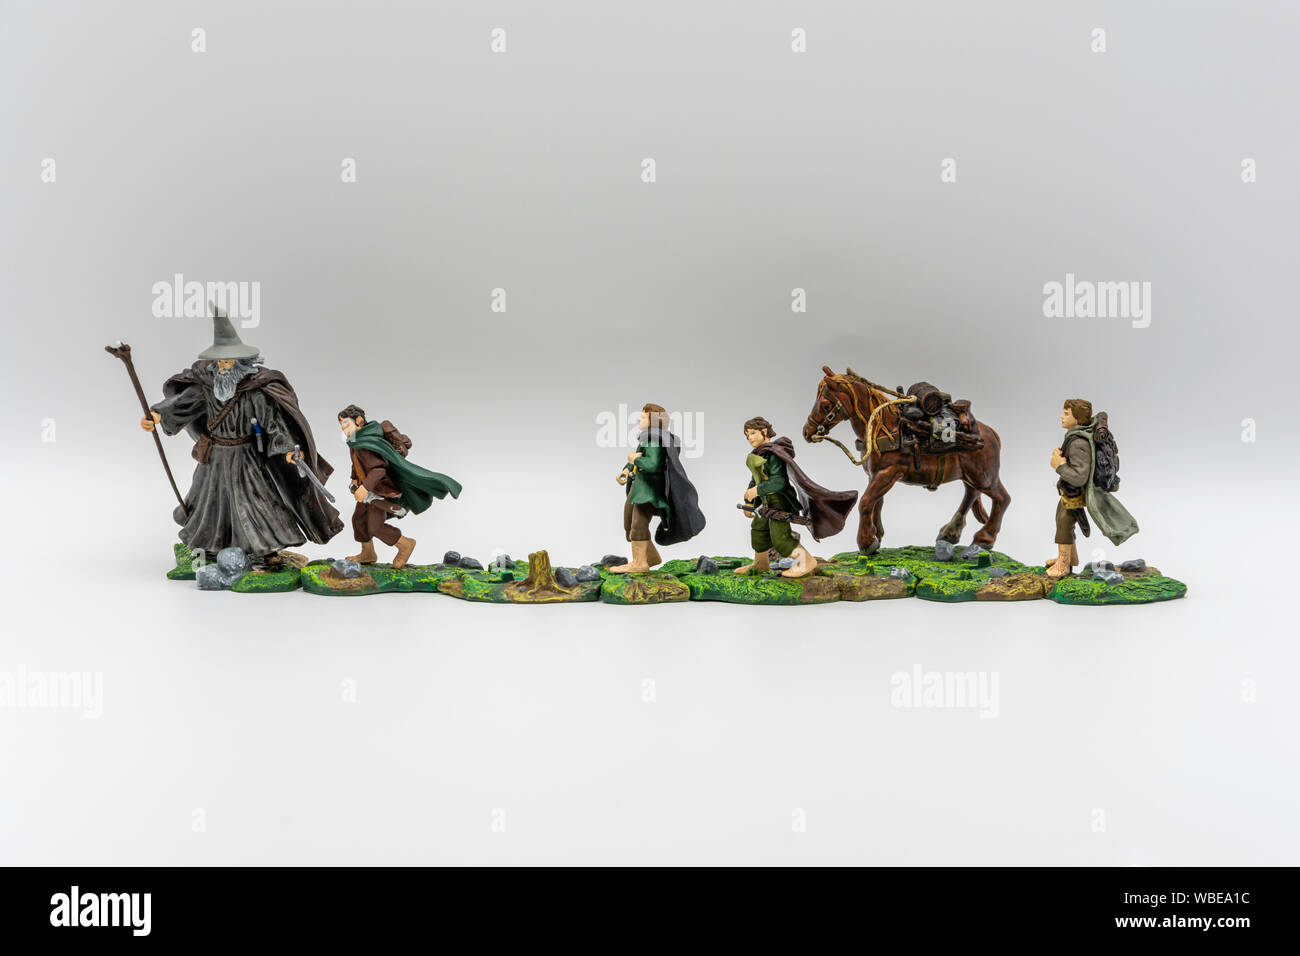 Hobbit Toy: Gandolph leads four Hobbits on their quest. Stock Photo